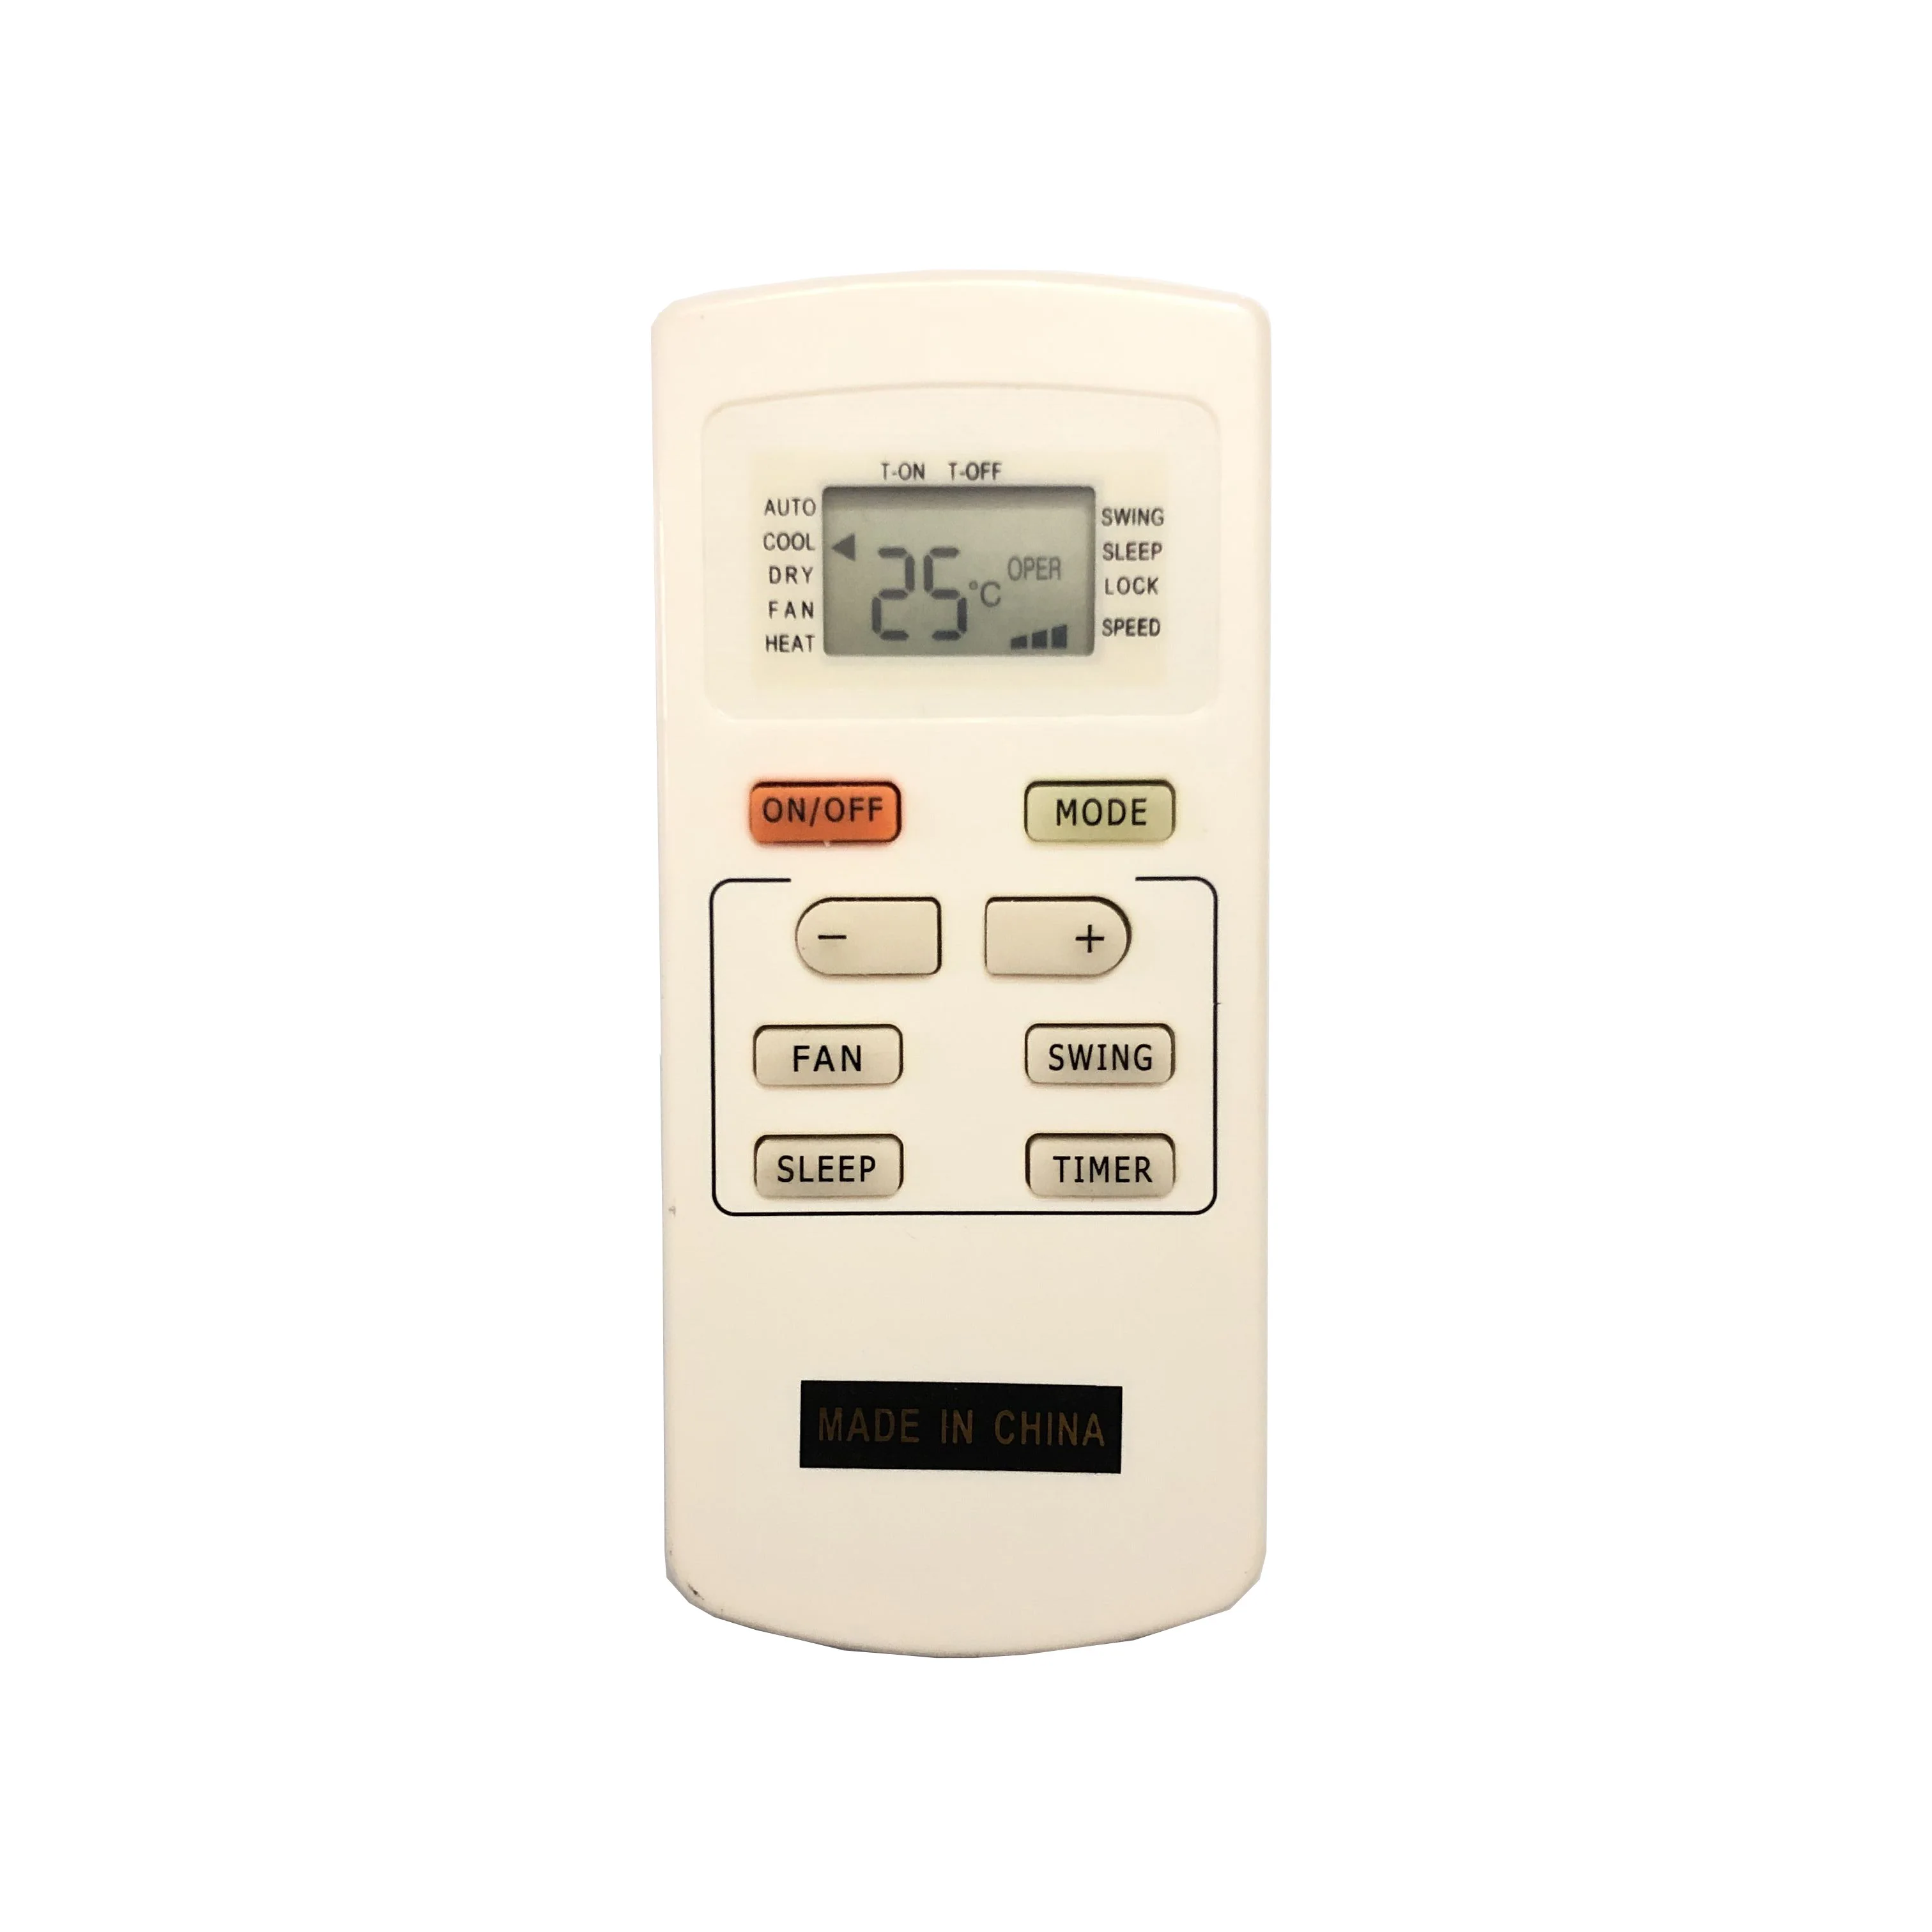 

NEW Conditioner air conditioning remote control suitable for gree YX1F YX1F1 YX1F2 YX1F1F YX1F3 YX1F4 YX1F5 YX1F5F YX1F4F